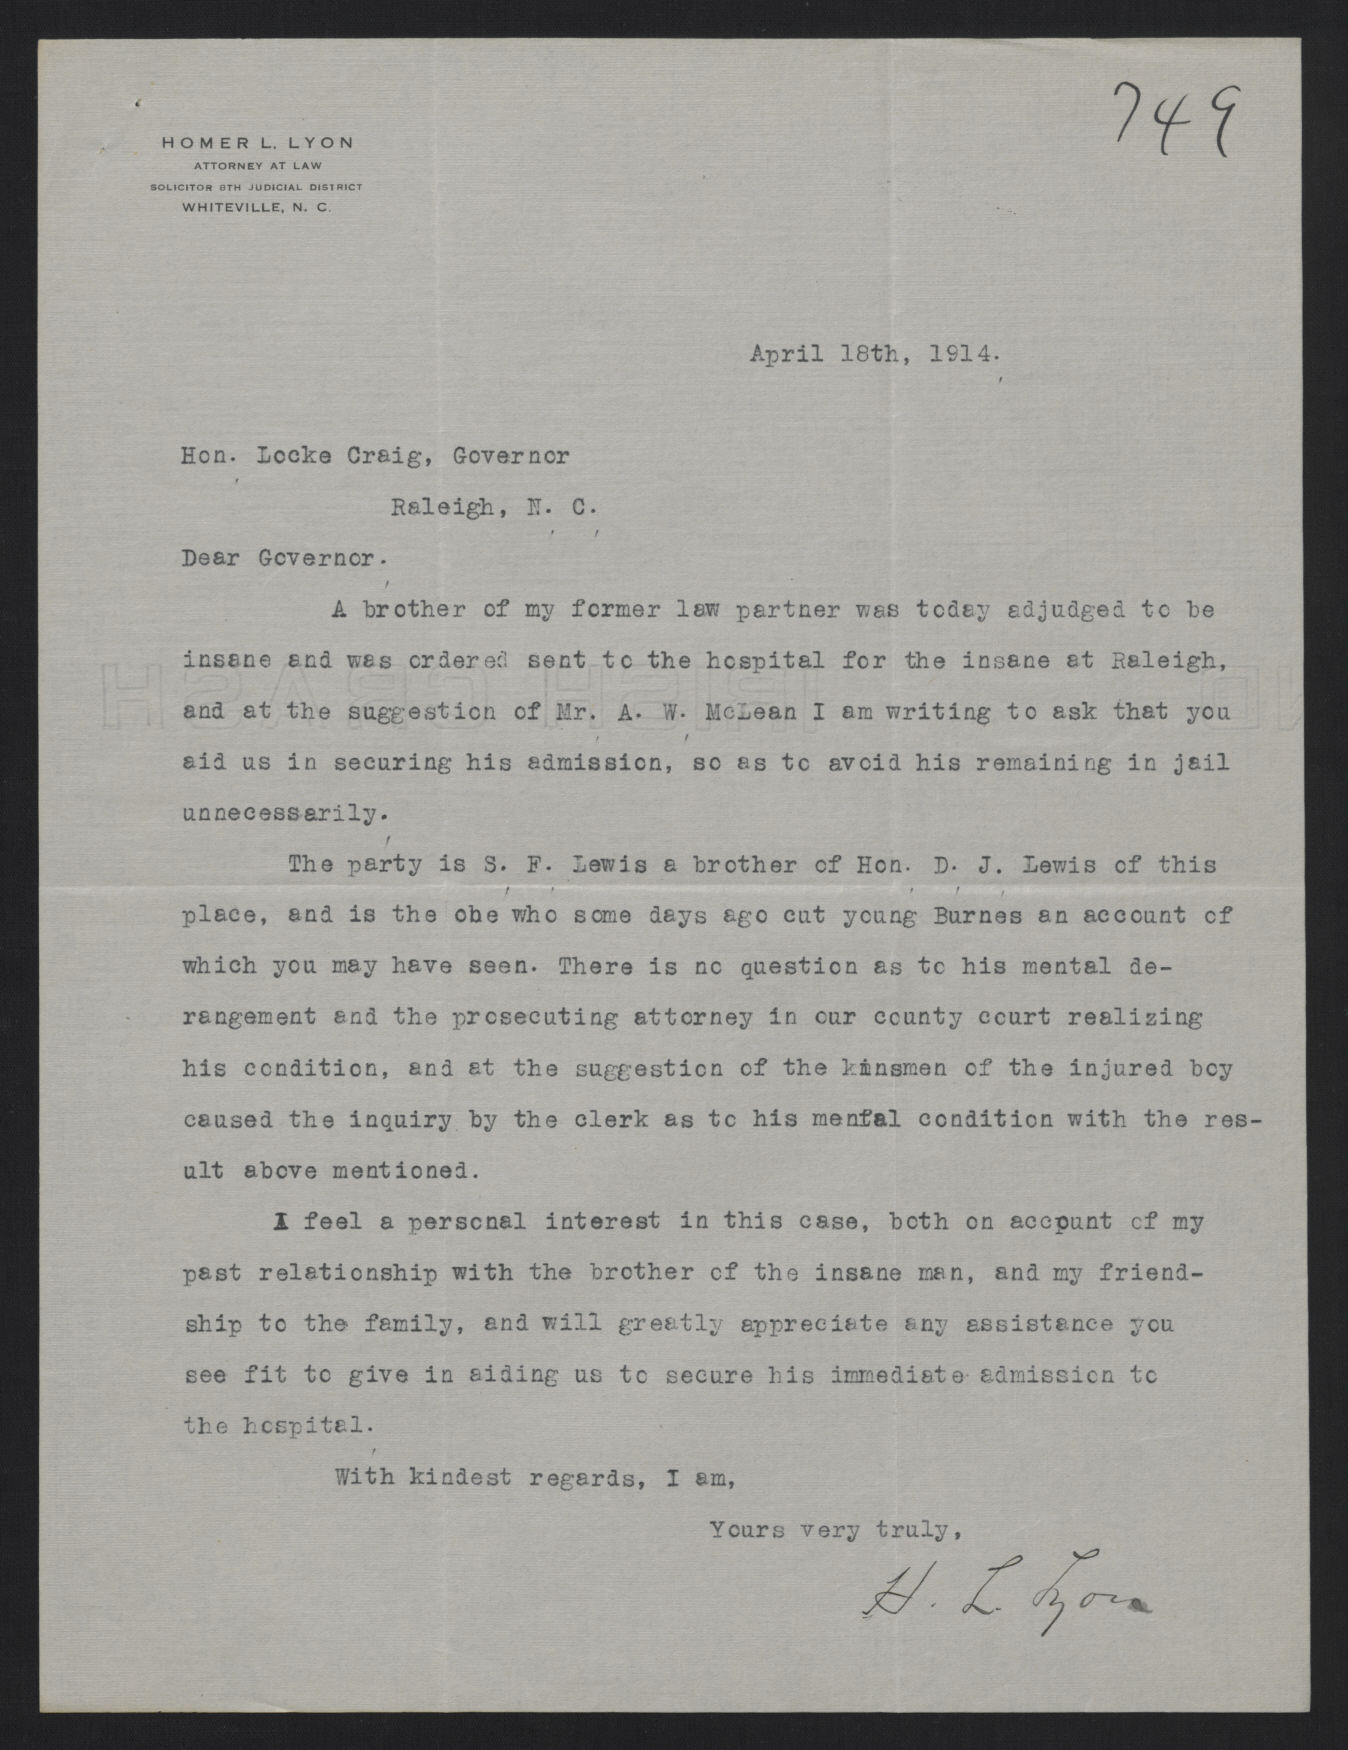 Letter from Lyon to Craig, April 18, 1914